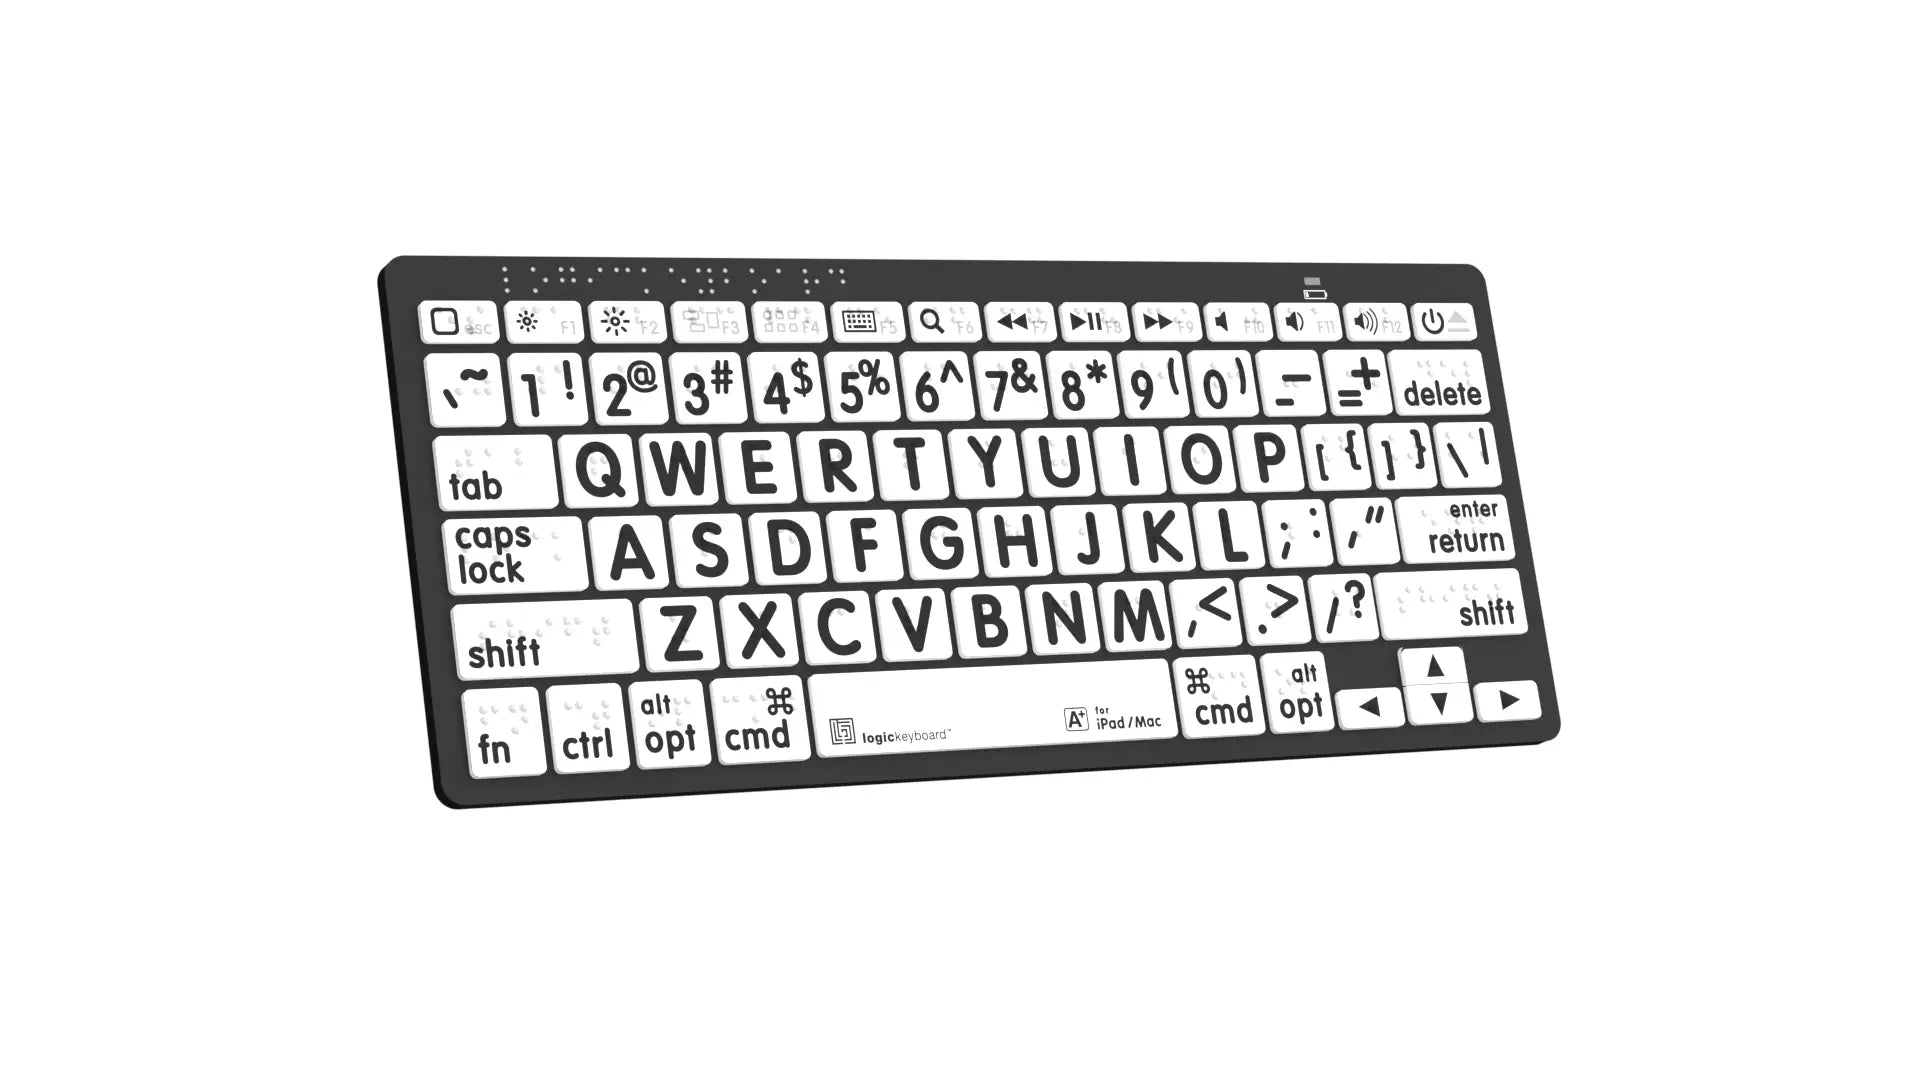 Left angle Image of the Braille & LargePrint Black on White Bluetooth Keyboard for Mac from LogicKeyboard